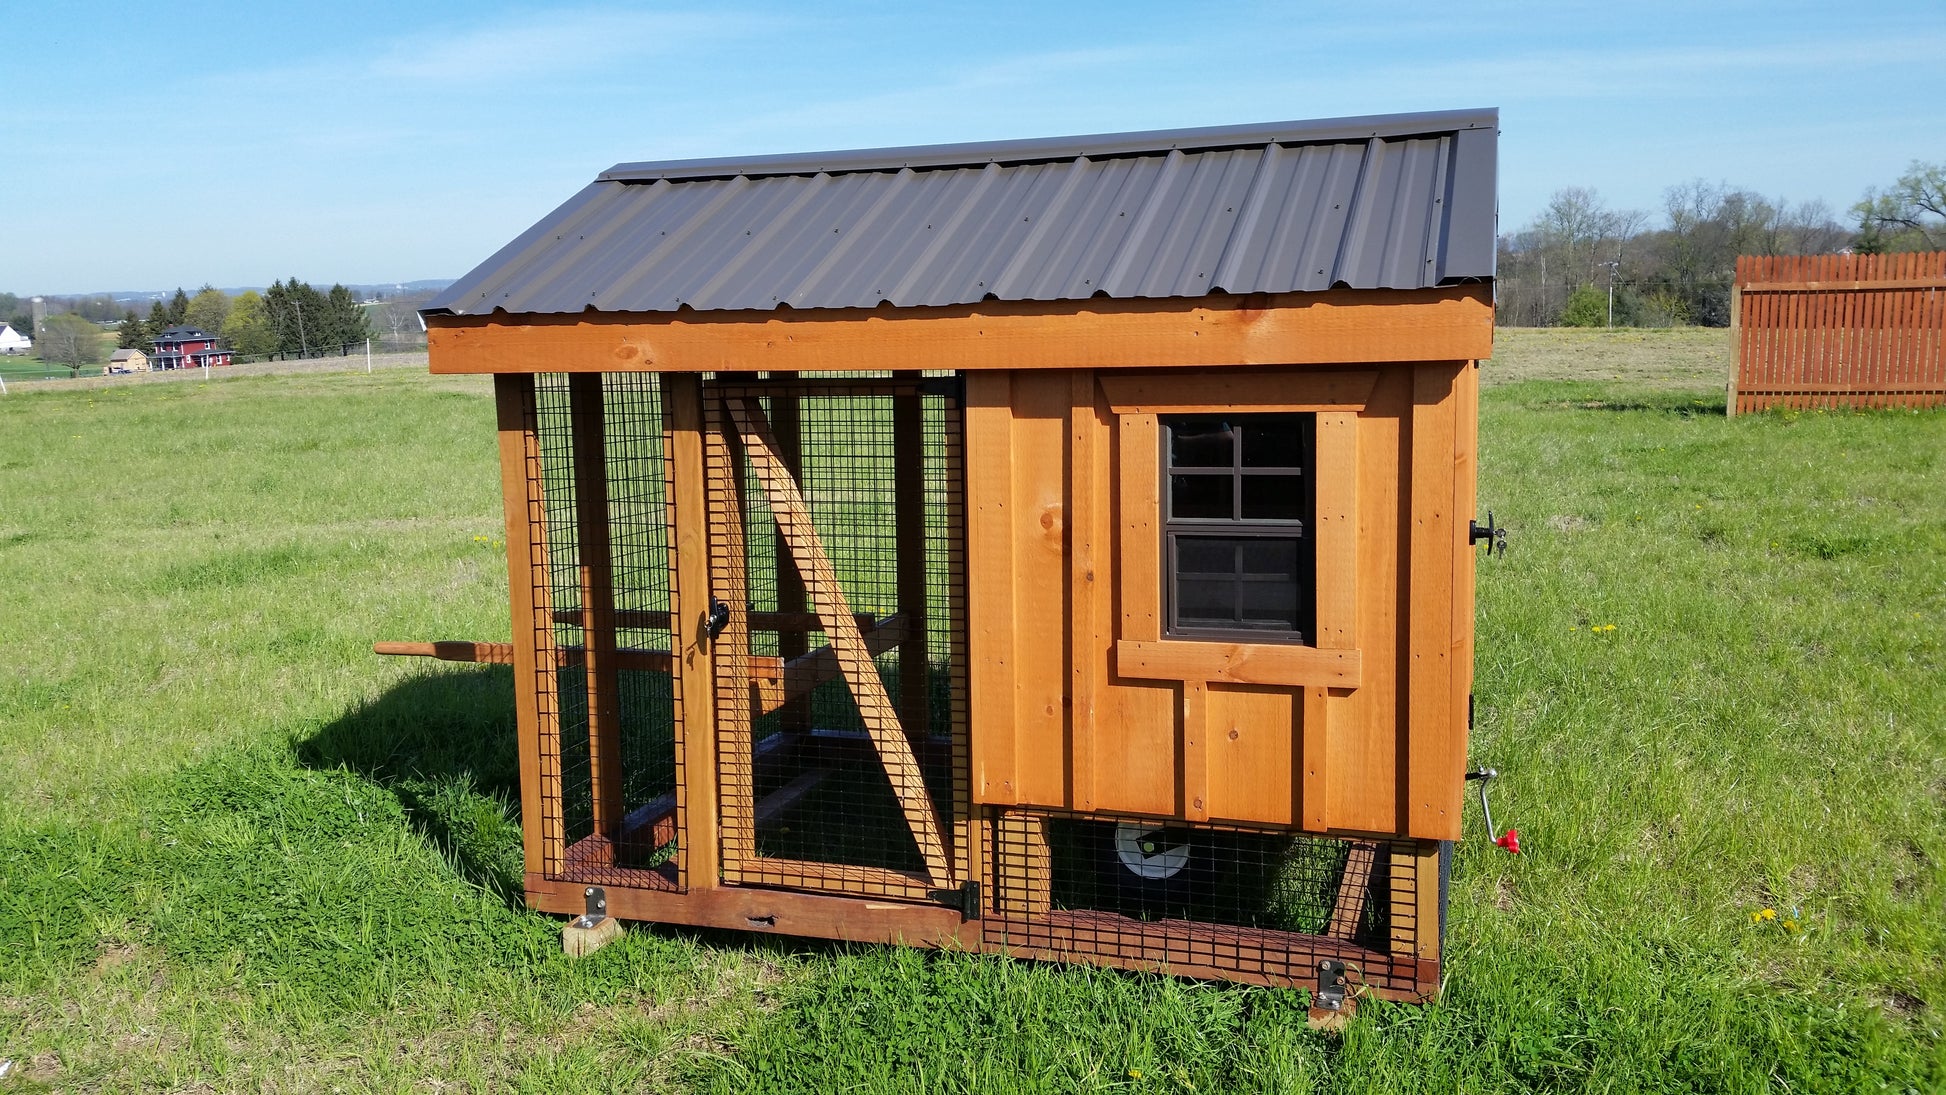 All-In-One 4x6 Chicken Coop plus Run